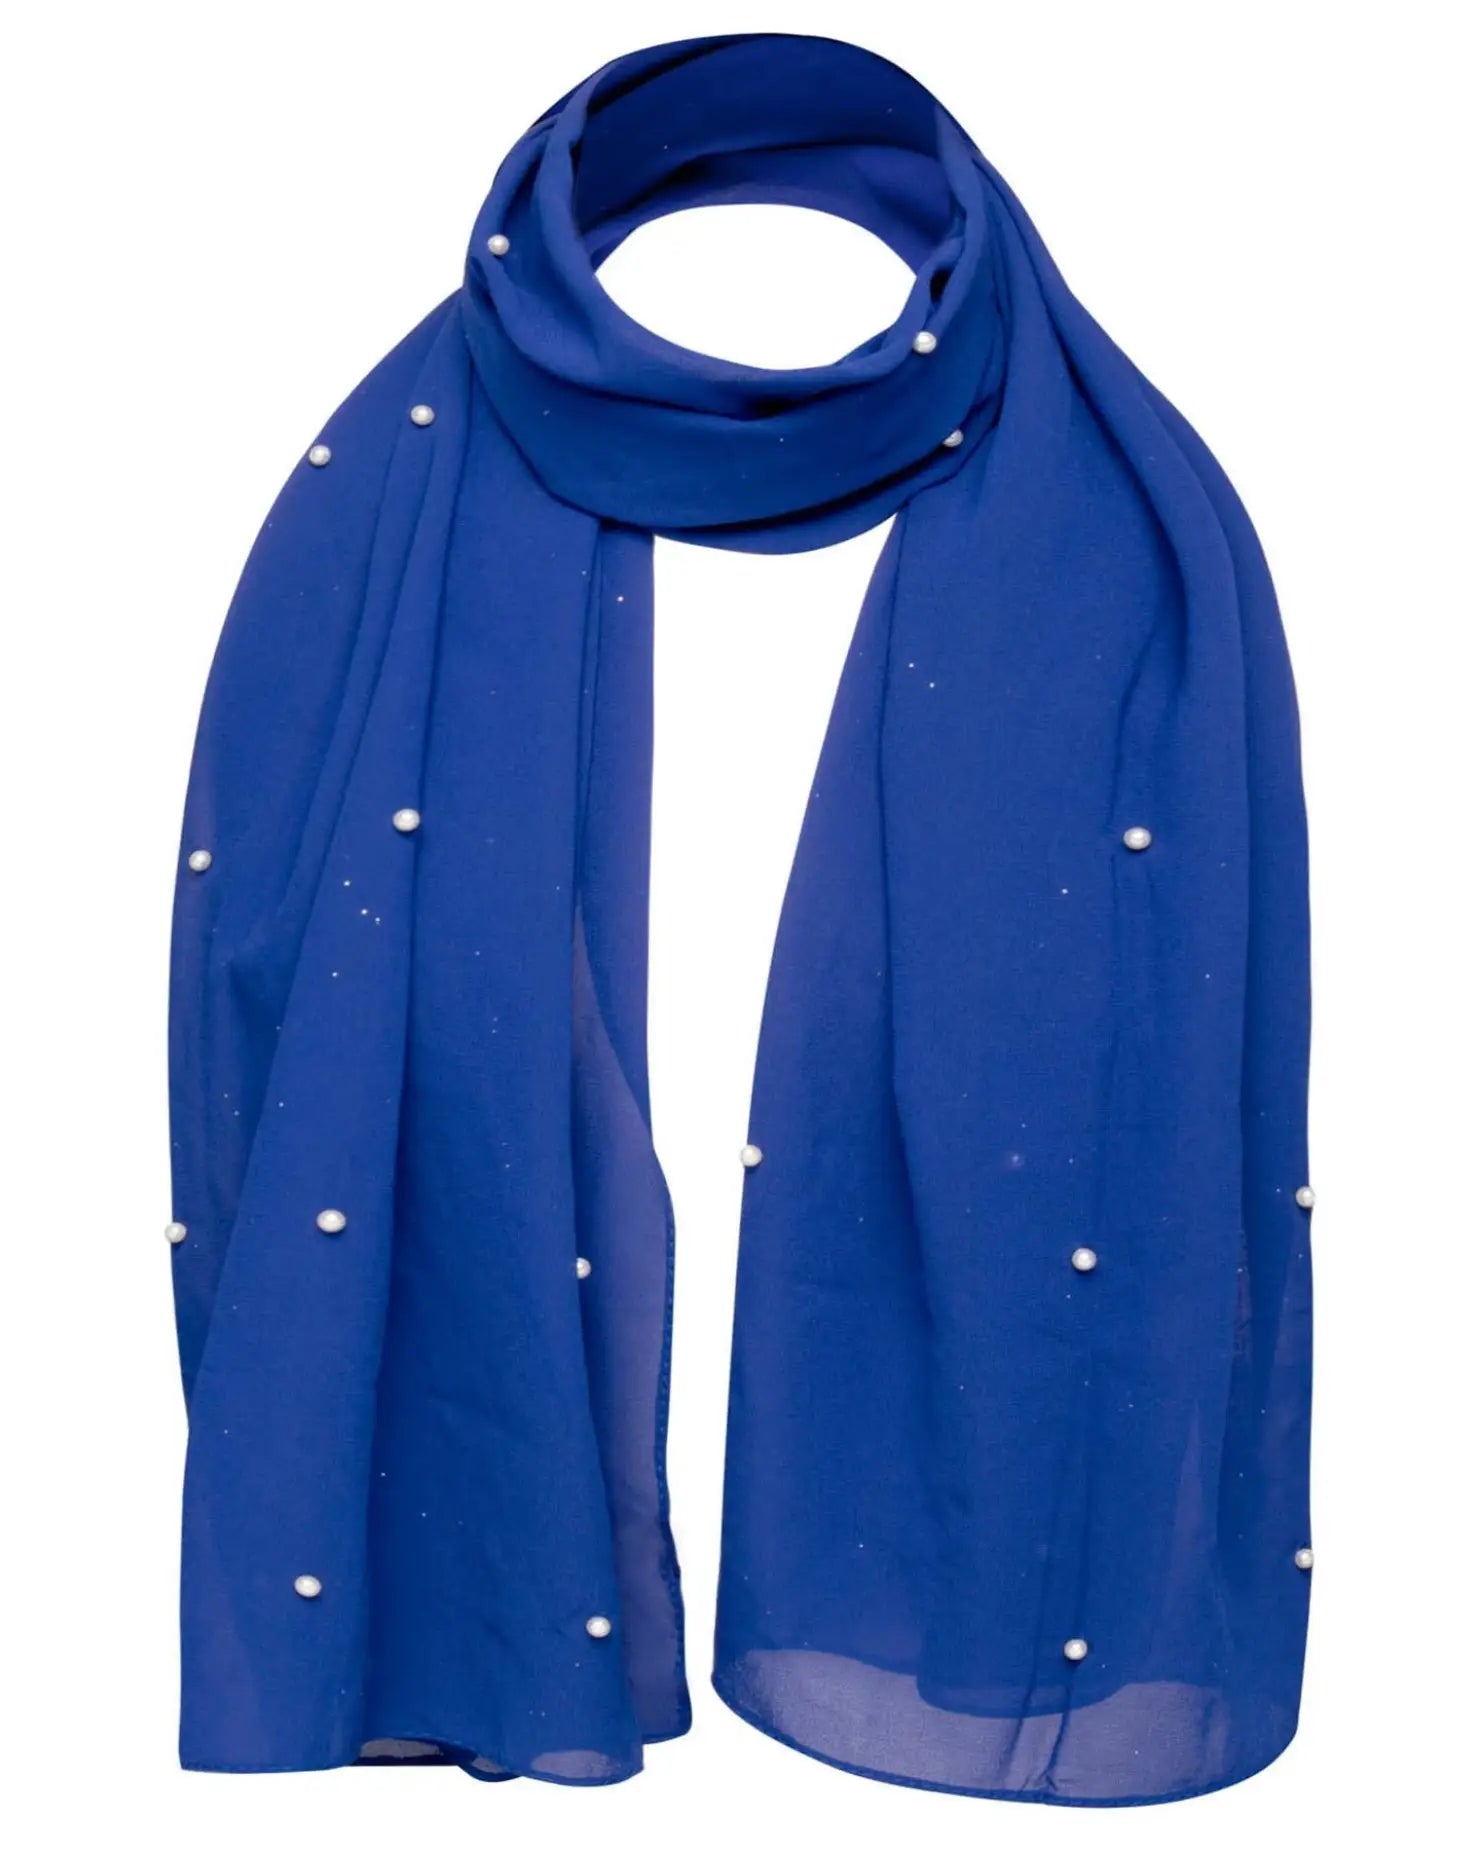 Blue chiffon scarf with pearls - Pearl Chiffon Scarf with Durable Pearl Attachments